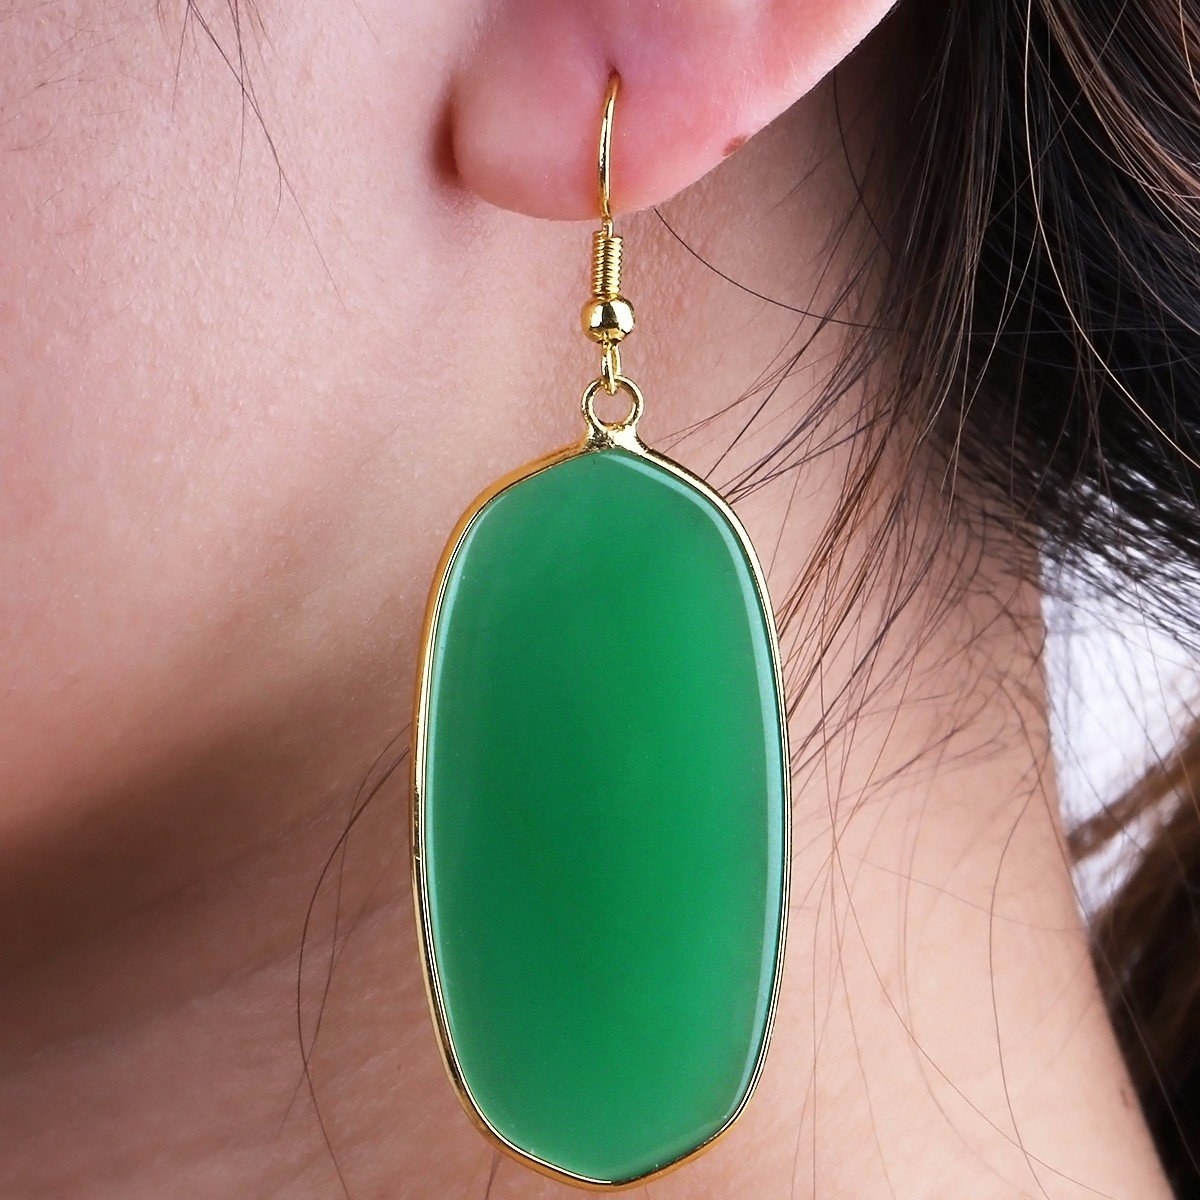 Big Earring with light weight. 